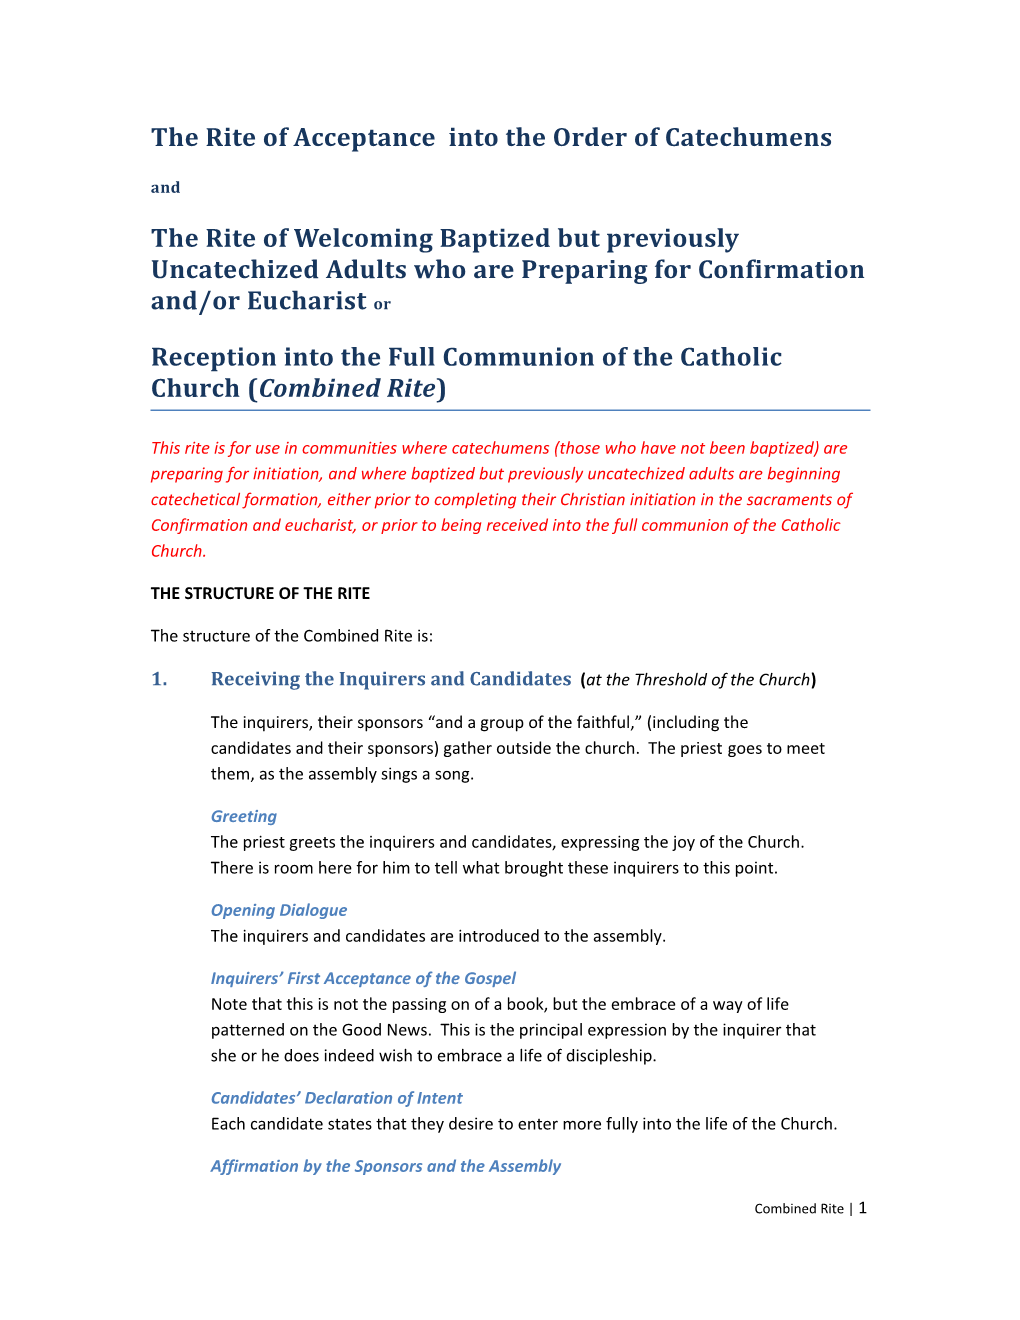 The Rite of Acceptance Into the Order of Catechumens